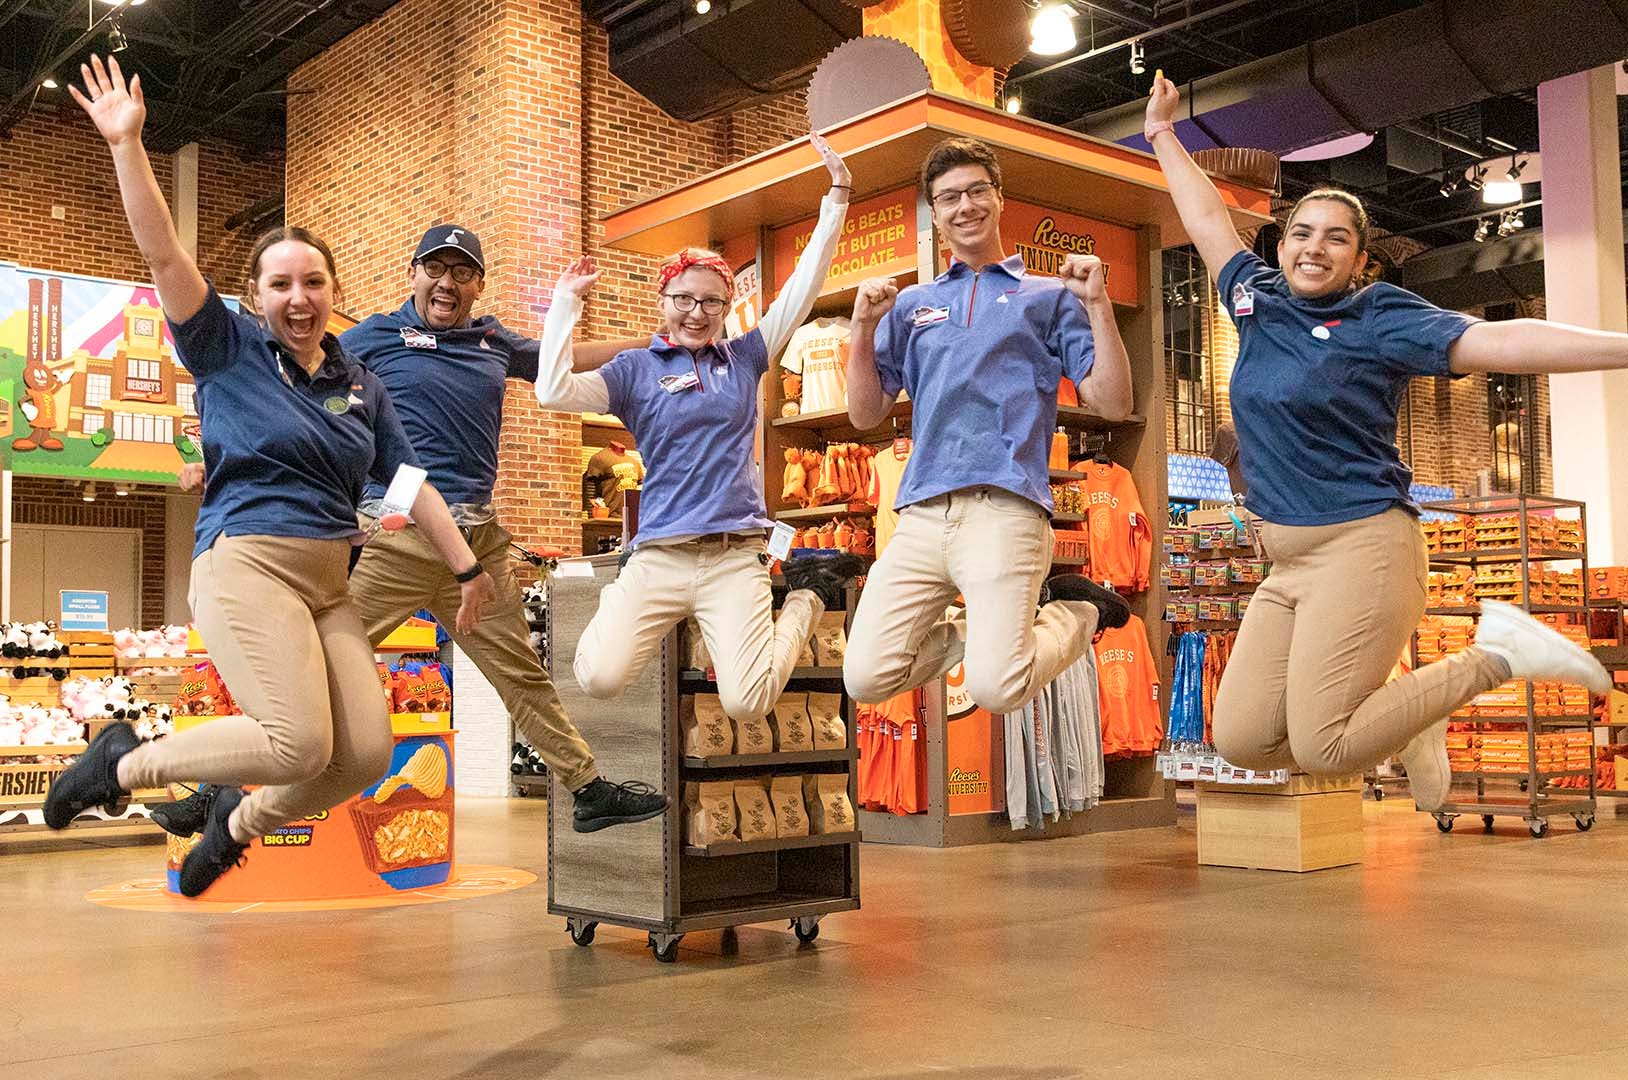 Employees jumping and having fun